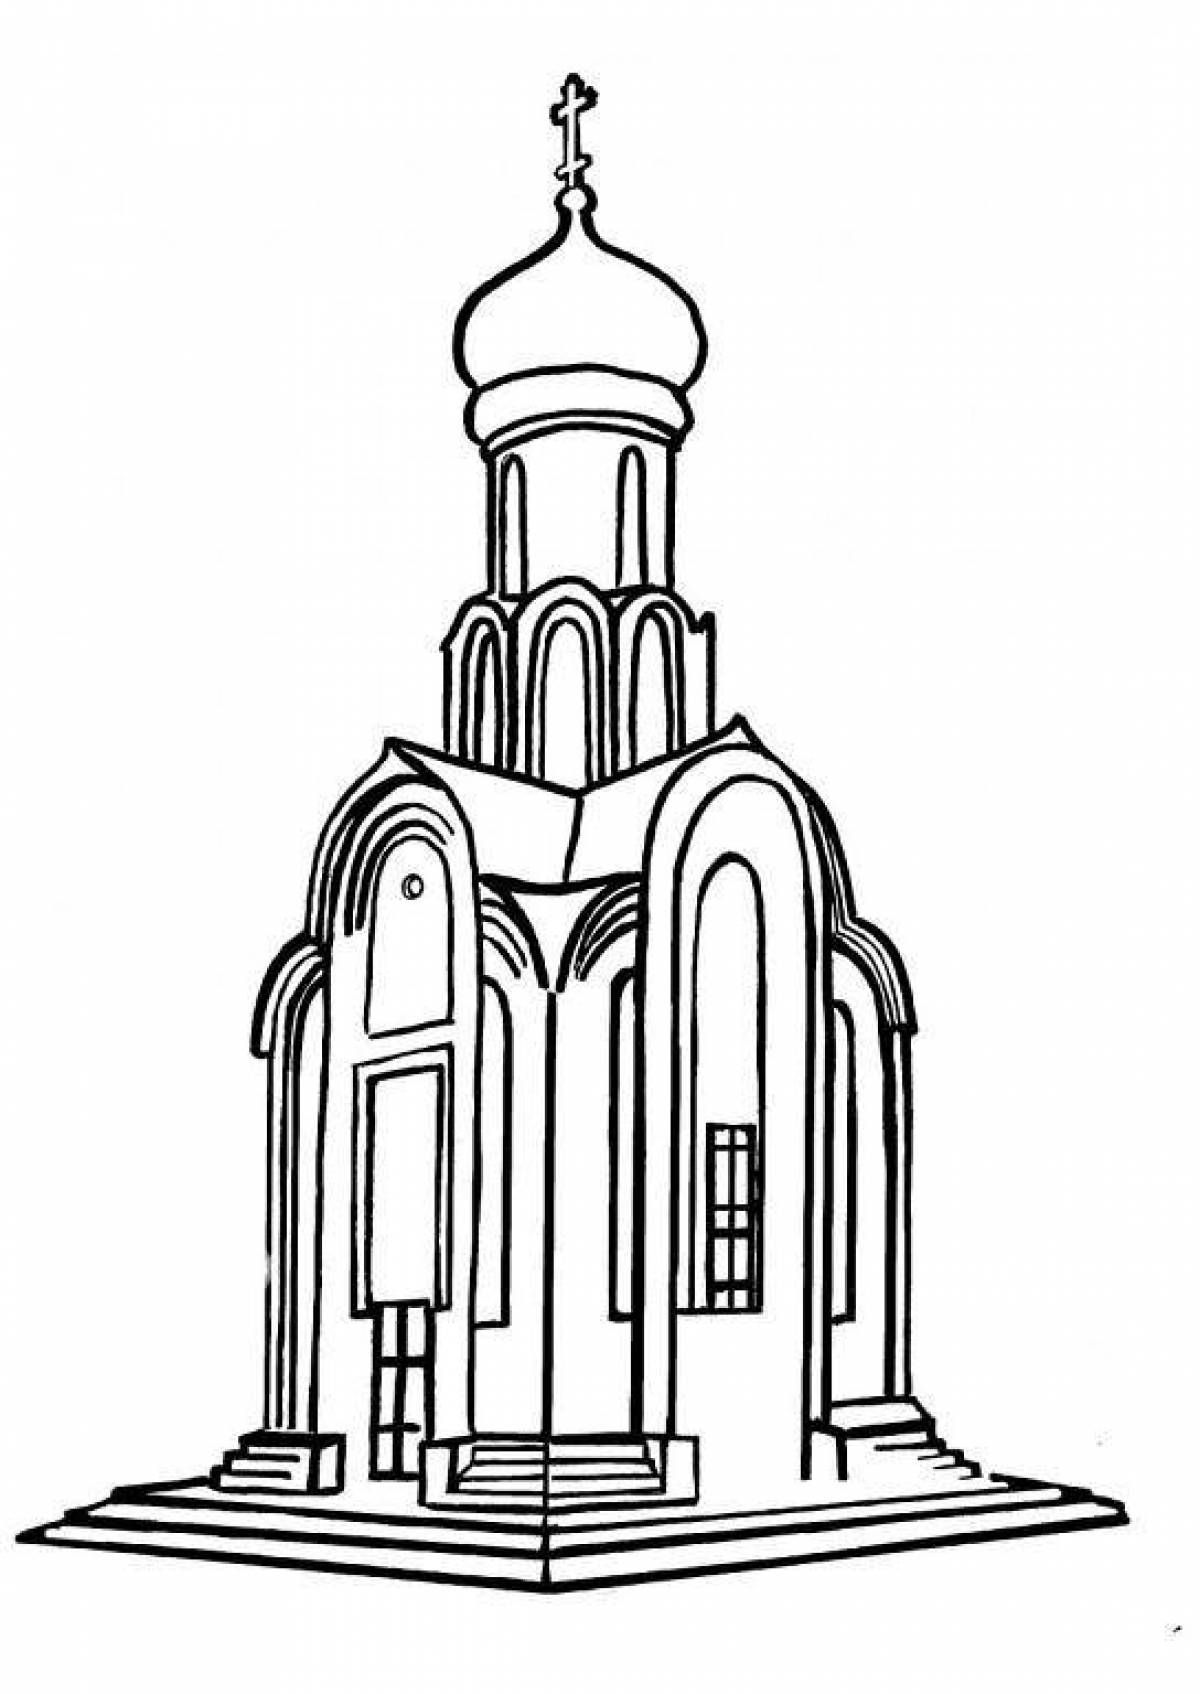 Violent church coloring pages for kids